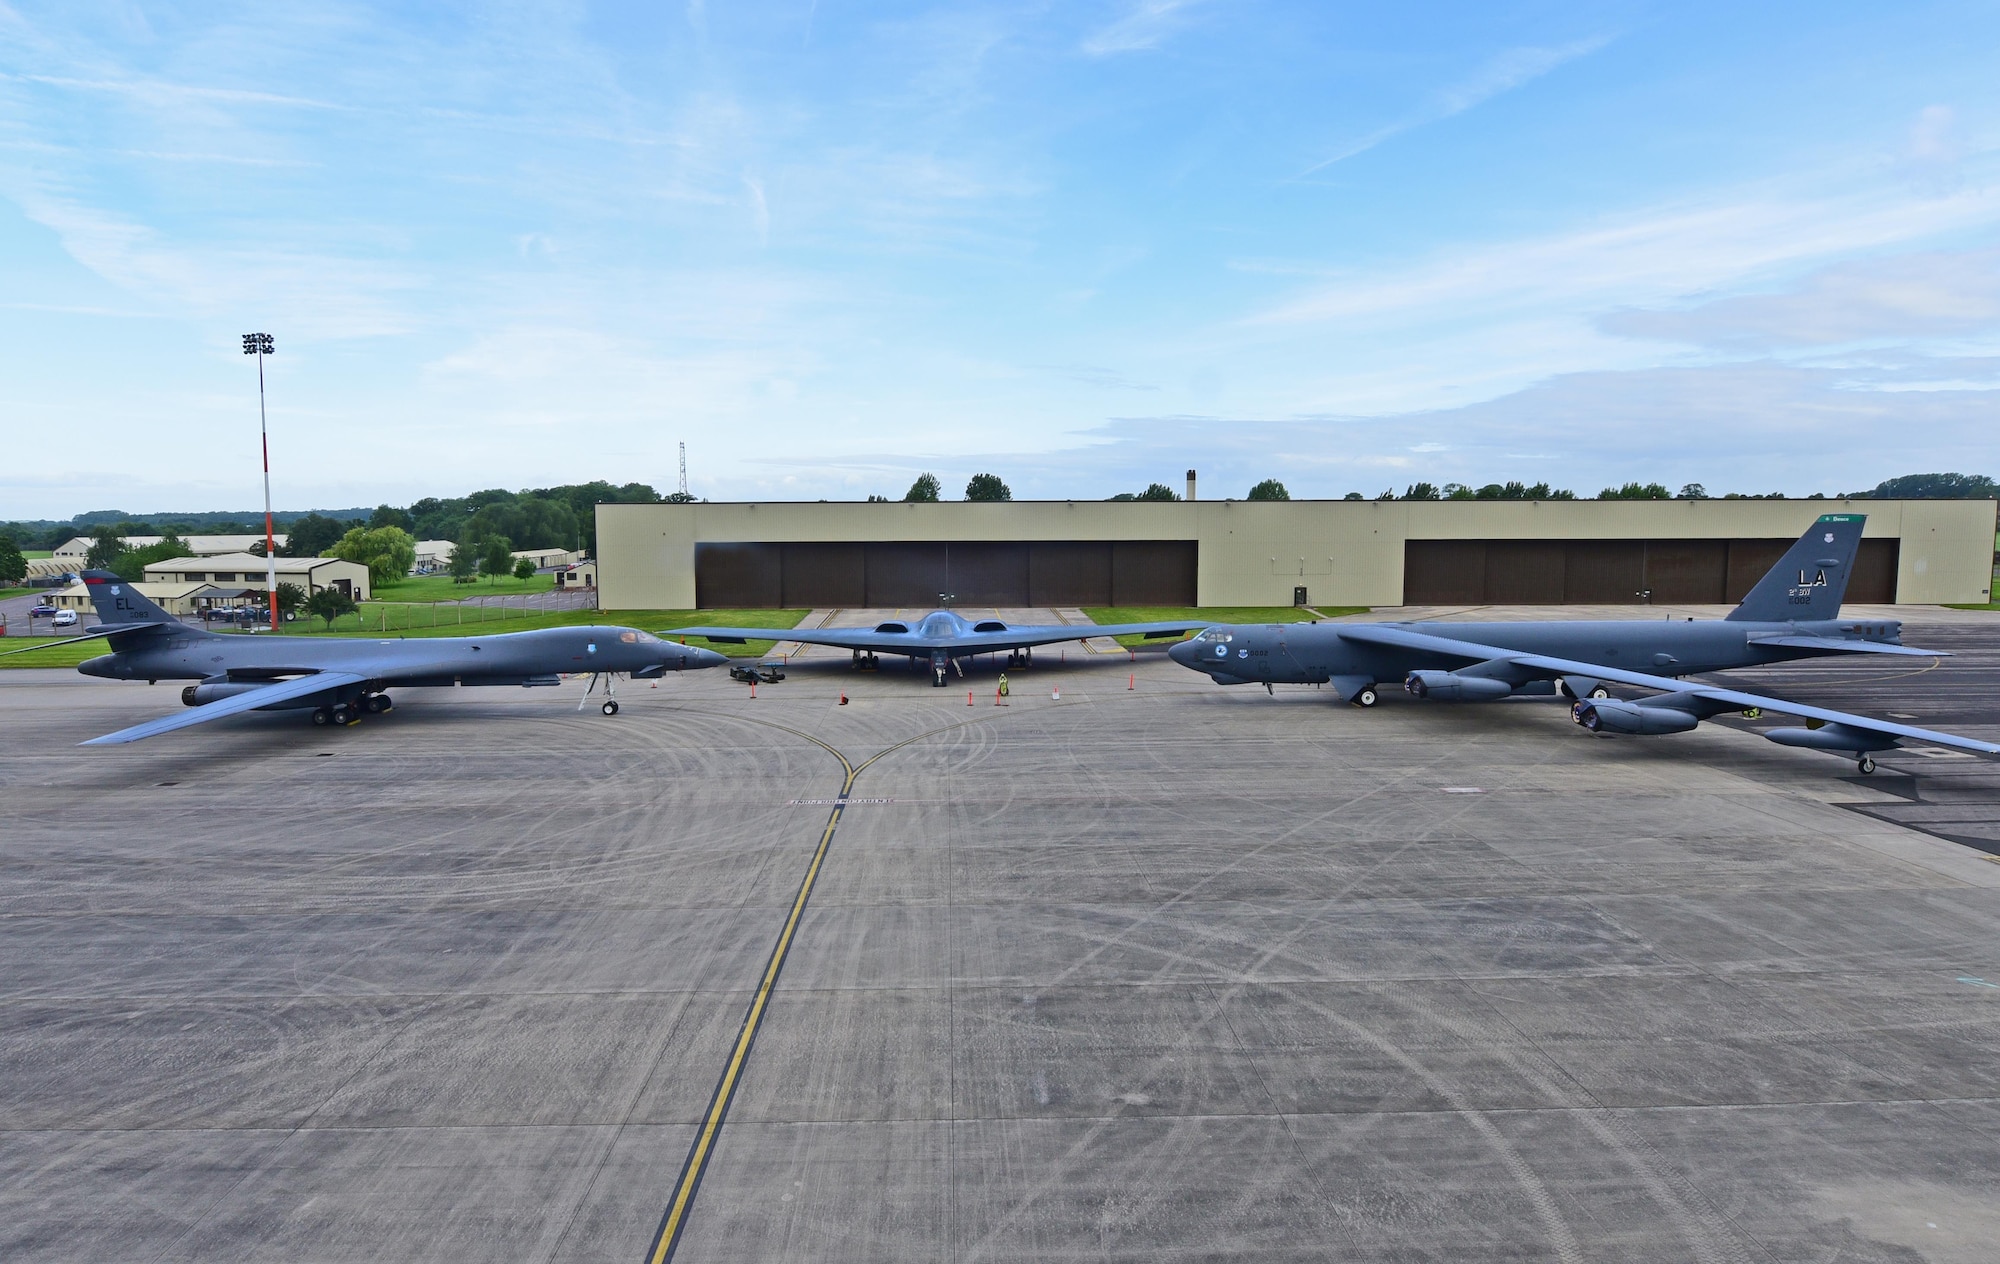 A B-1B Lancer from Ellsworth Air Force Base, S.D., a B-2 Spirit from Whiteman Air Force Base, Mo., and a B-52 Stratofortress from Barksdale Air Force Base, La., are parked on the ramp at Royal Air Force Fairford, U.K., June 12, 2017. This marks the first time in history that all three of Air Force Global Strike Command’s strategic bomber aircraft are simultaneously in the European Theatre, demonstrating the flexible global strike capability. (U.S. Air Force photo by Airman 1st Class Randahl Jenson)
